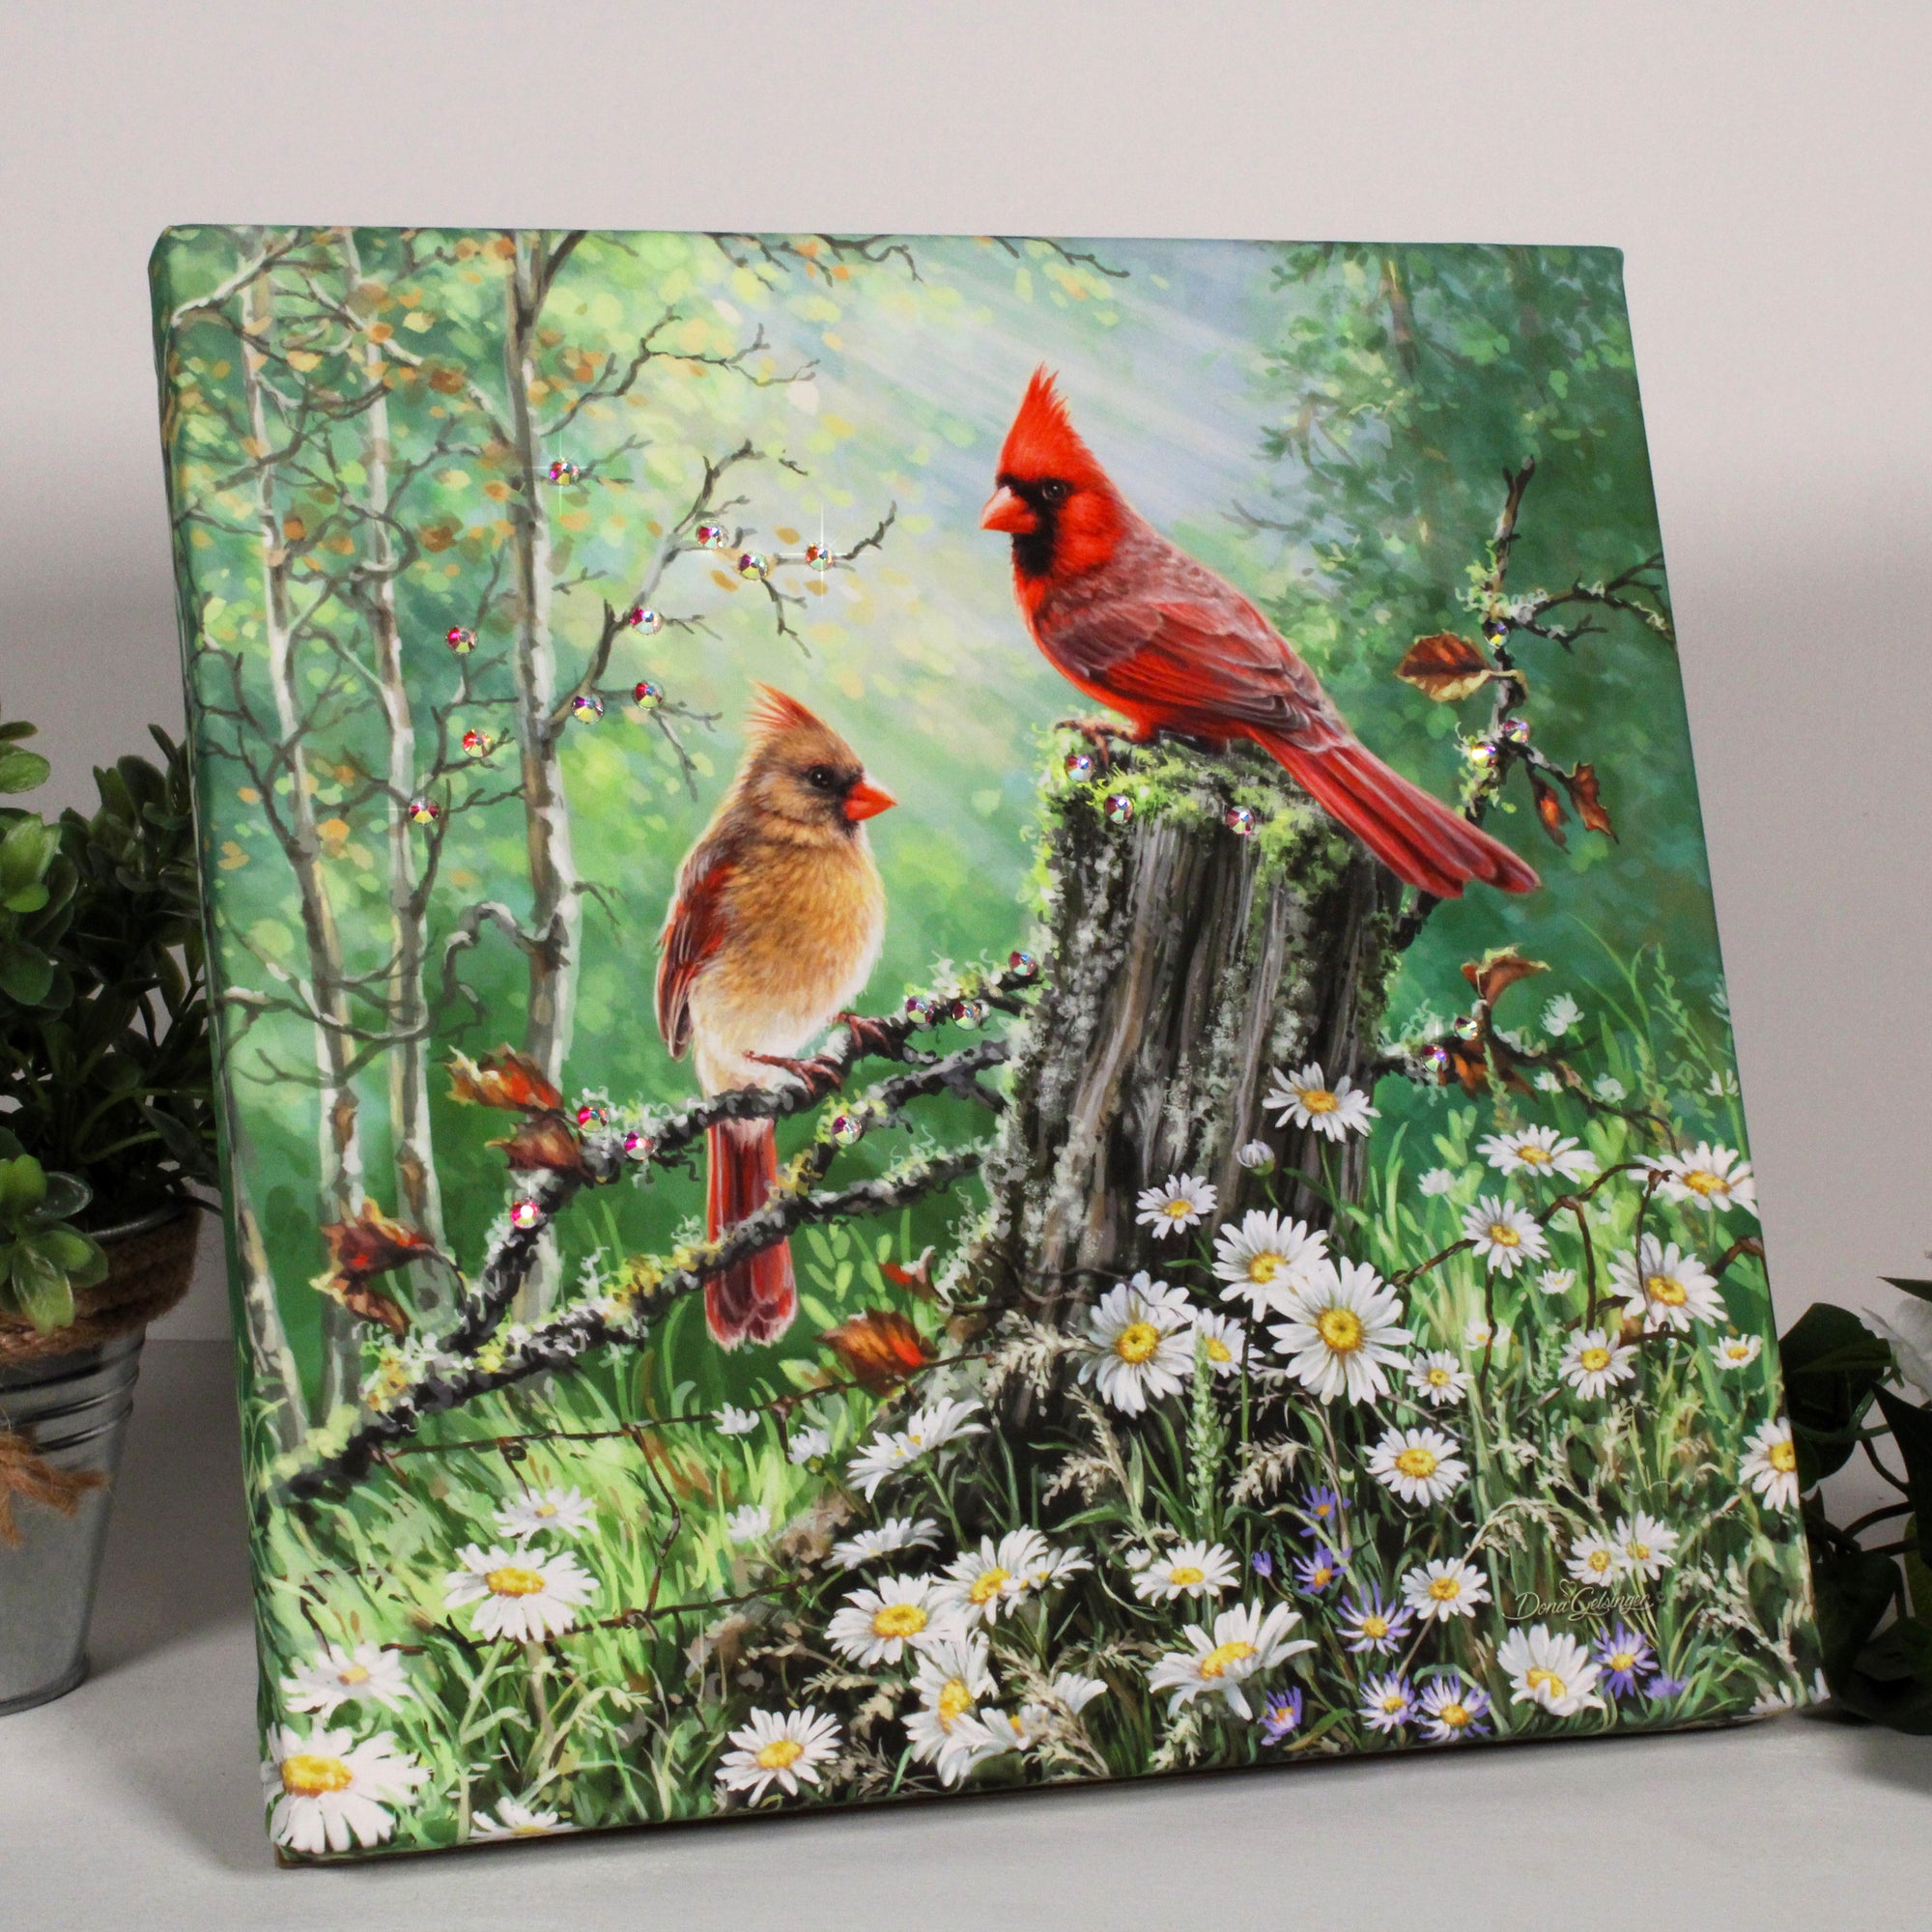 The print captures the essence of romance, featuring two cardinals perched in a picturesque forest. One cardinal gracefully sits on a rustic stump, while the other charmingly rests on a delicate branch surrounded by beautiful daisies.